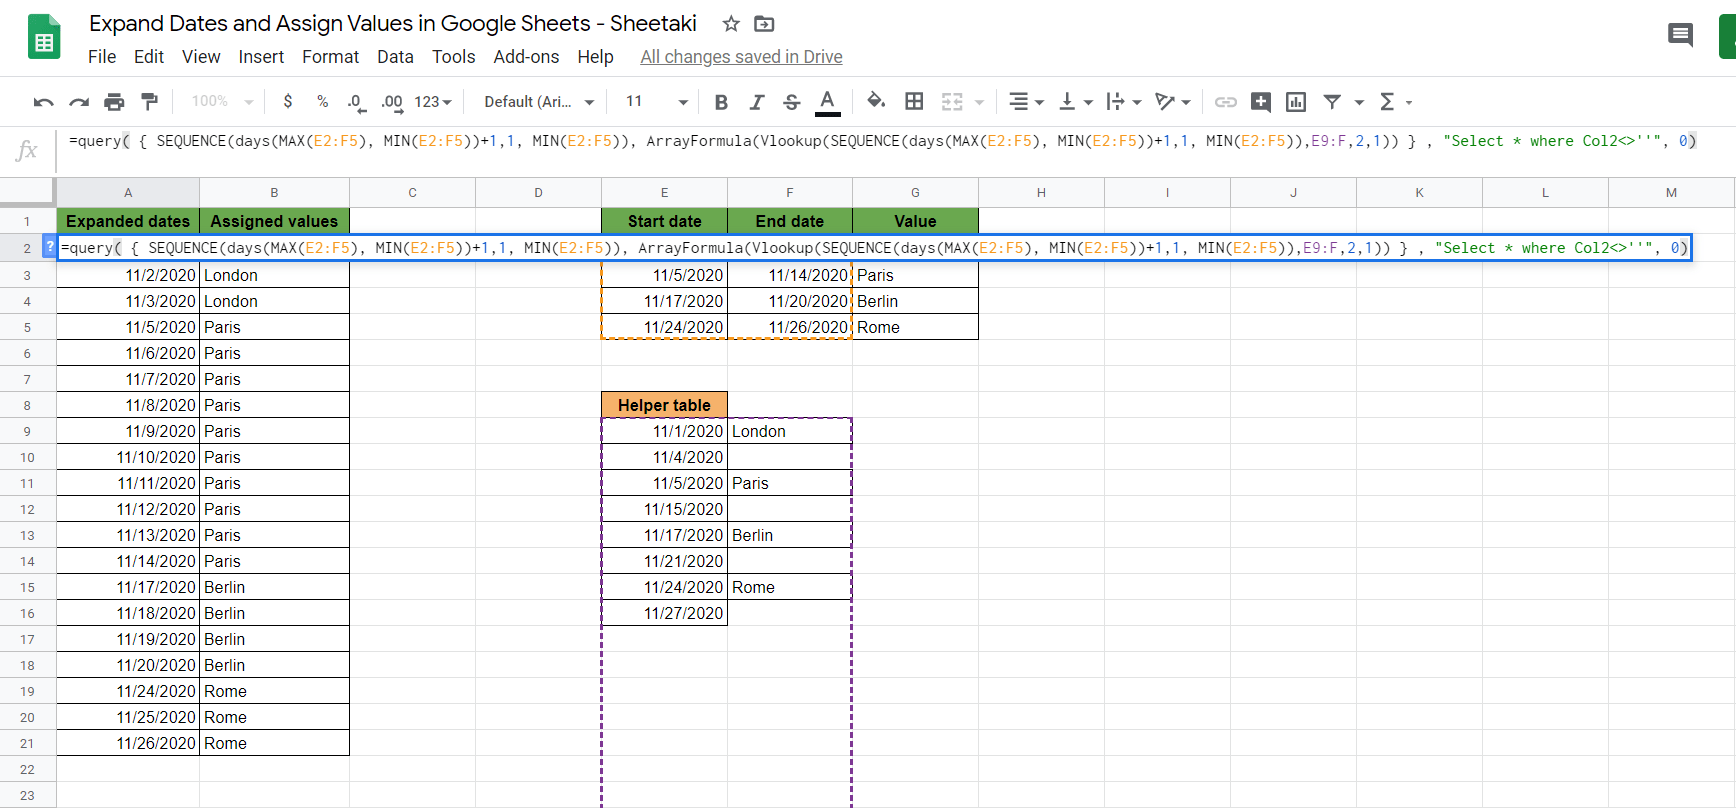 Expand Dates And Assign Values in Google Sheets